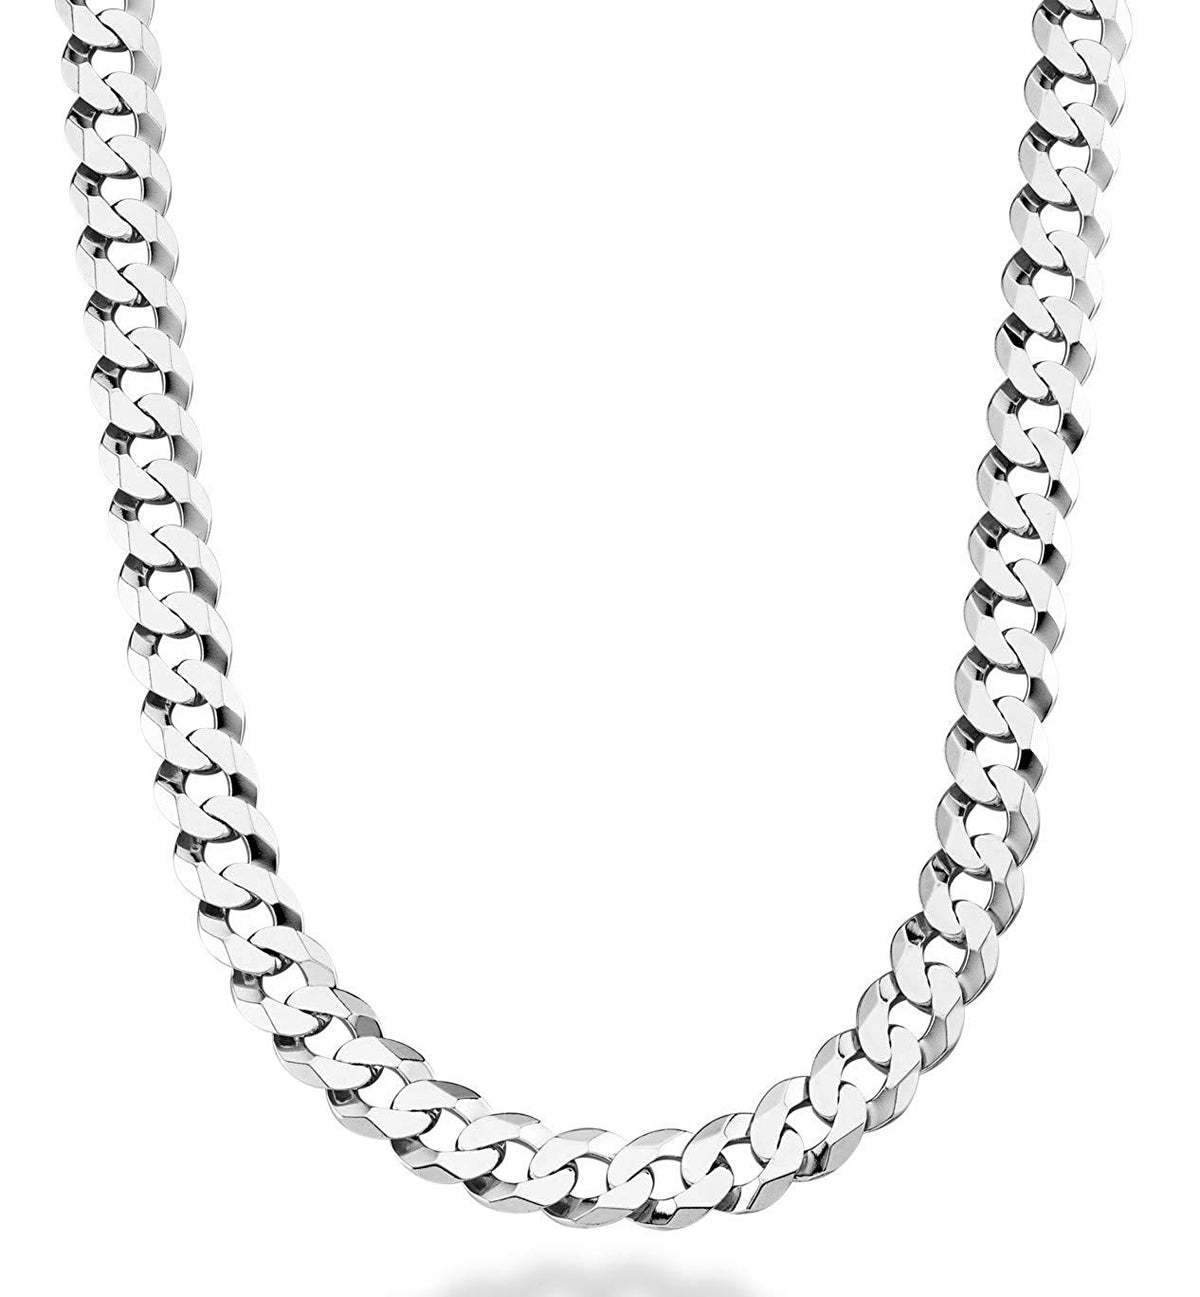 Sterling Silver Rhodium Plated Curb Chain Necklace, 13.5mm, 24" fine designer jewelry for men and women